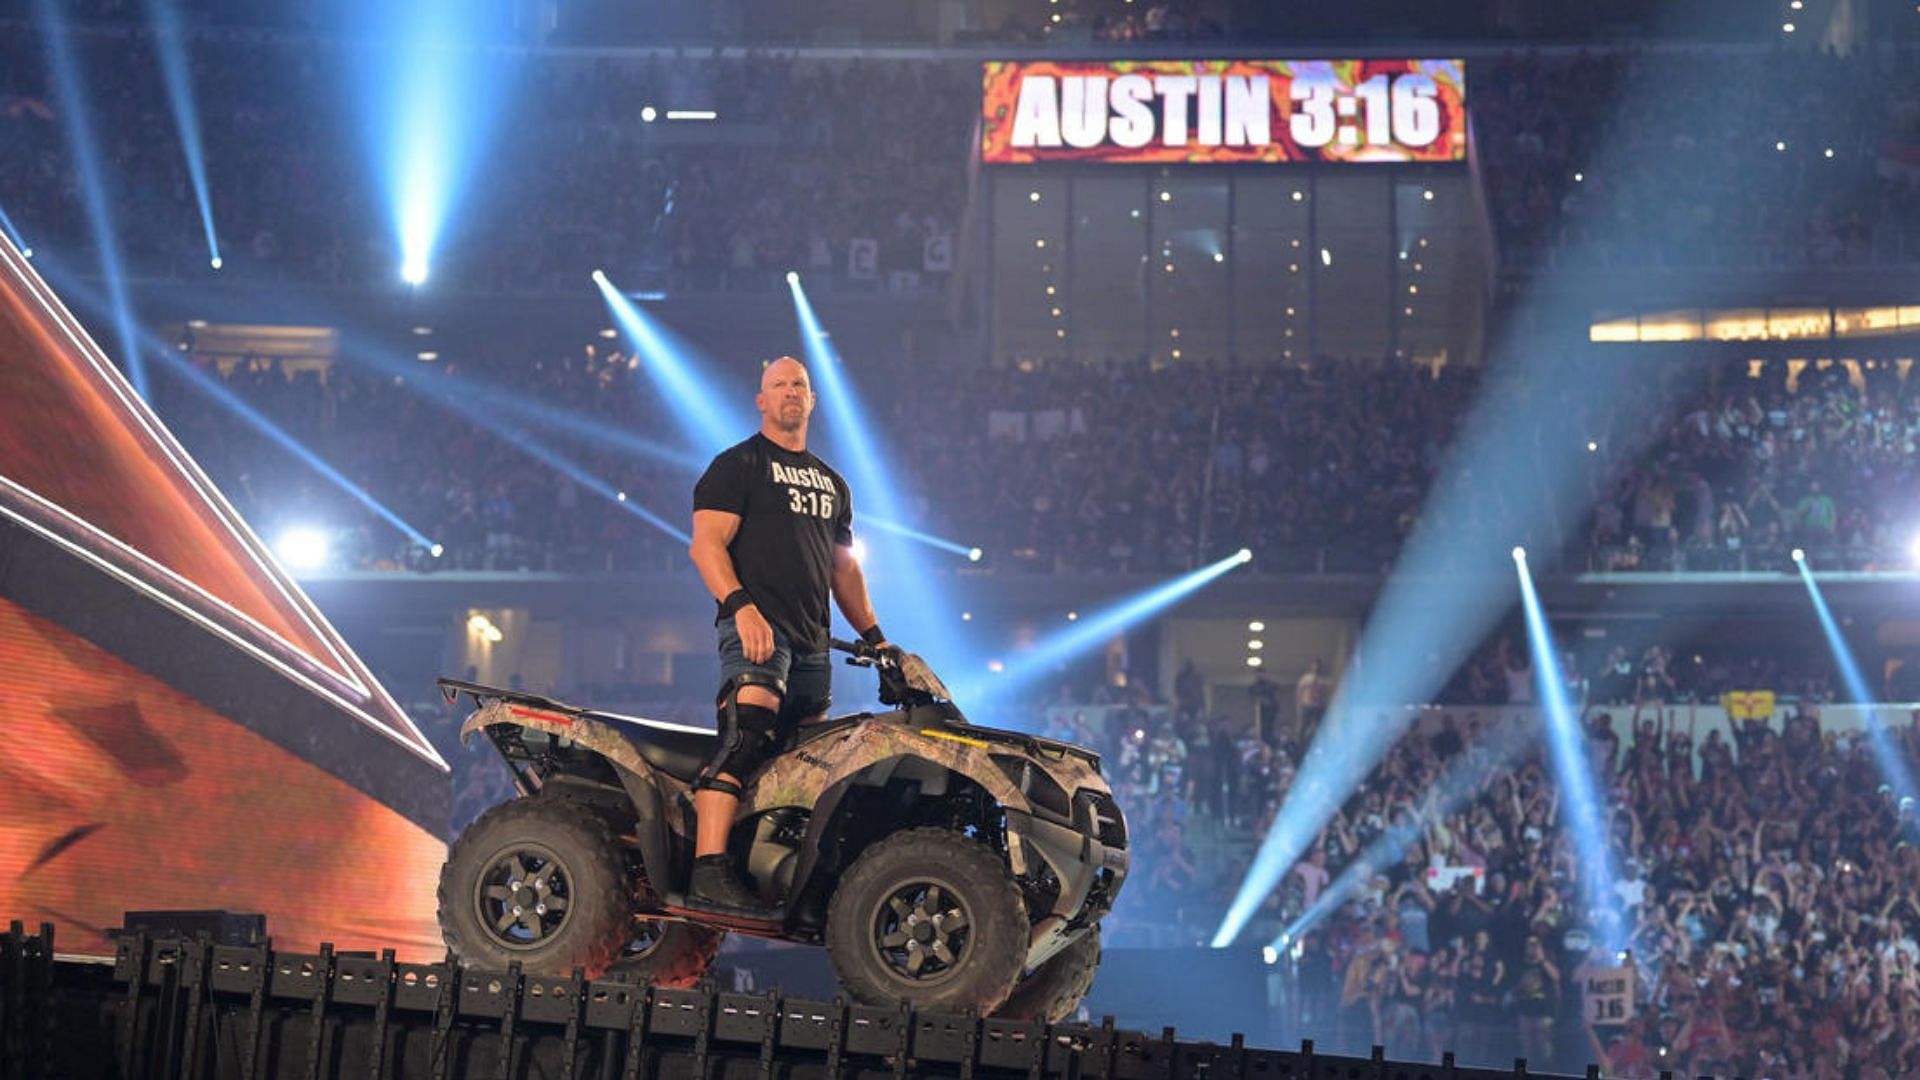 Steve Austin competed at WrestleMania 38!